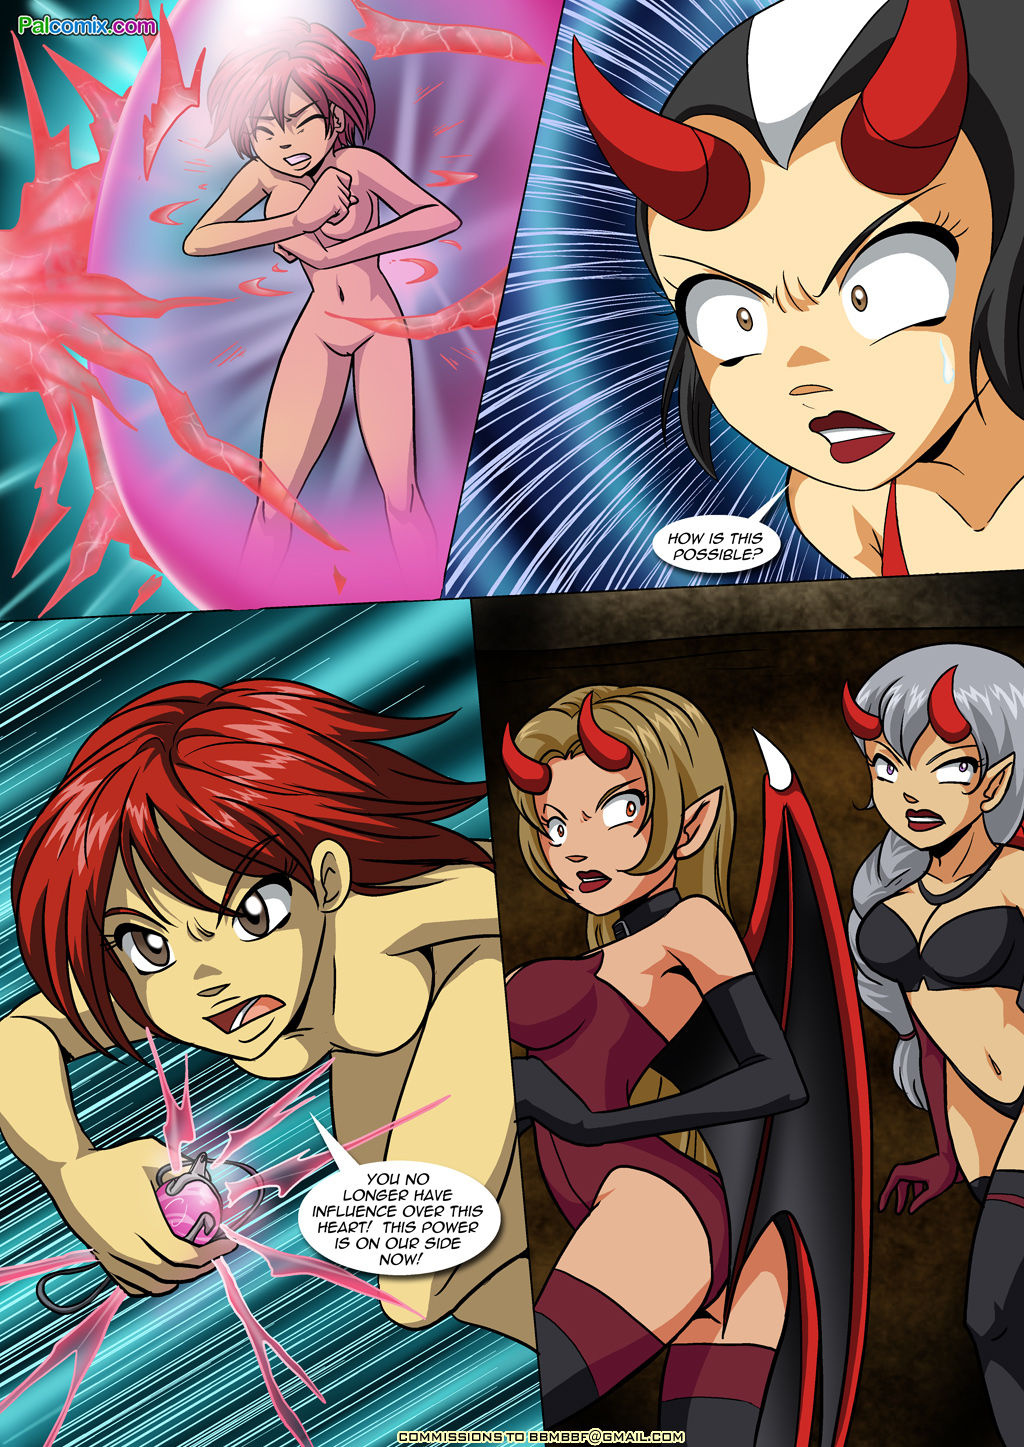 Enslaved Guardians cartoon porn Oral sex, Anal Sex, BDSM, Best, Bikini, Double Penetration, Group Sex, Kidnapping, Lesbians, Lolicon, Masturbation, Monster Girls, Rape, Sex and Magic, Sex Toys, Stockings, Tentacles